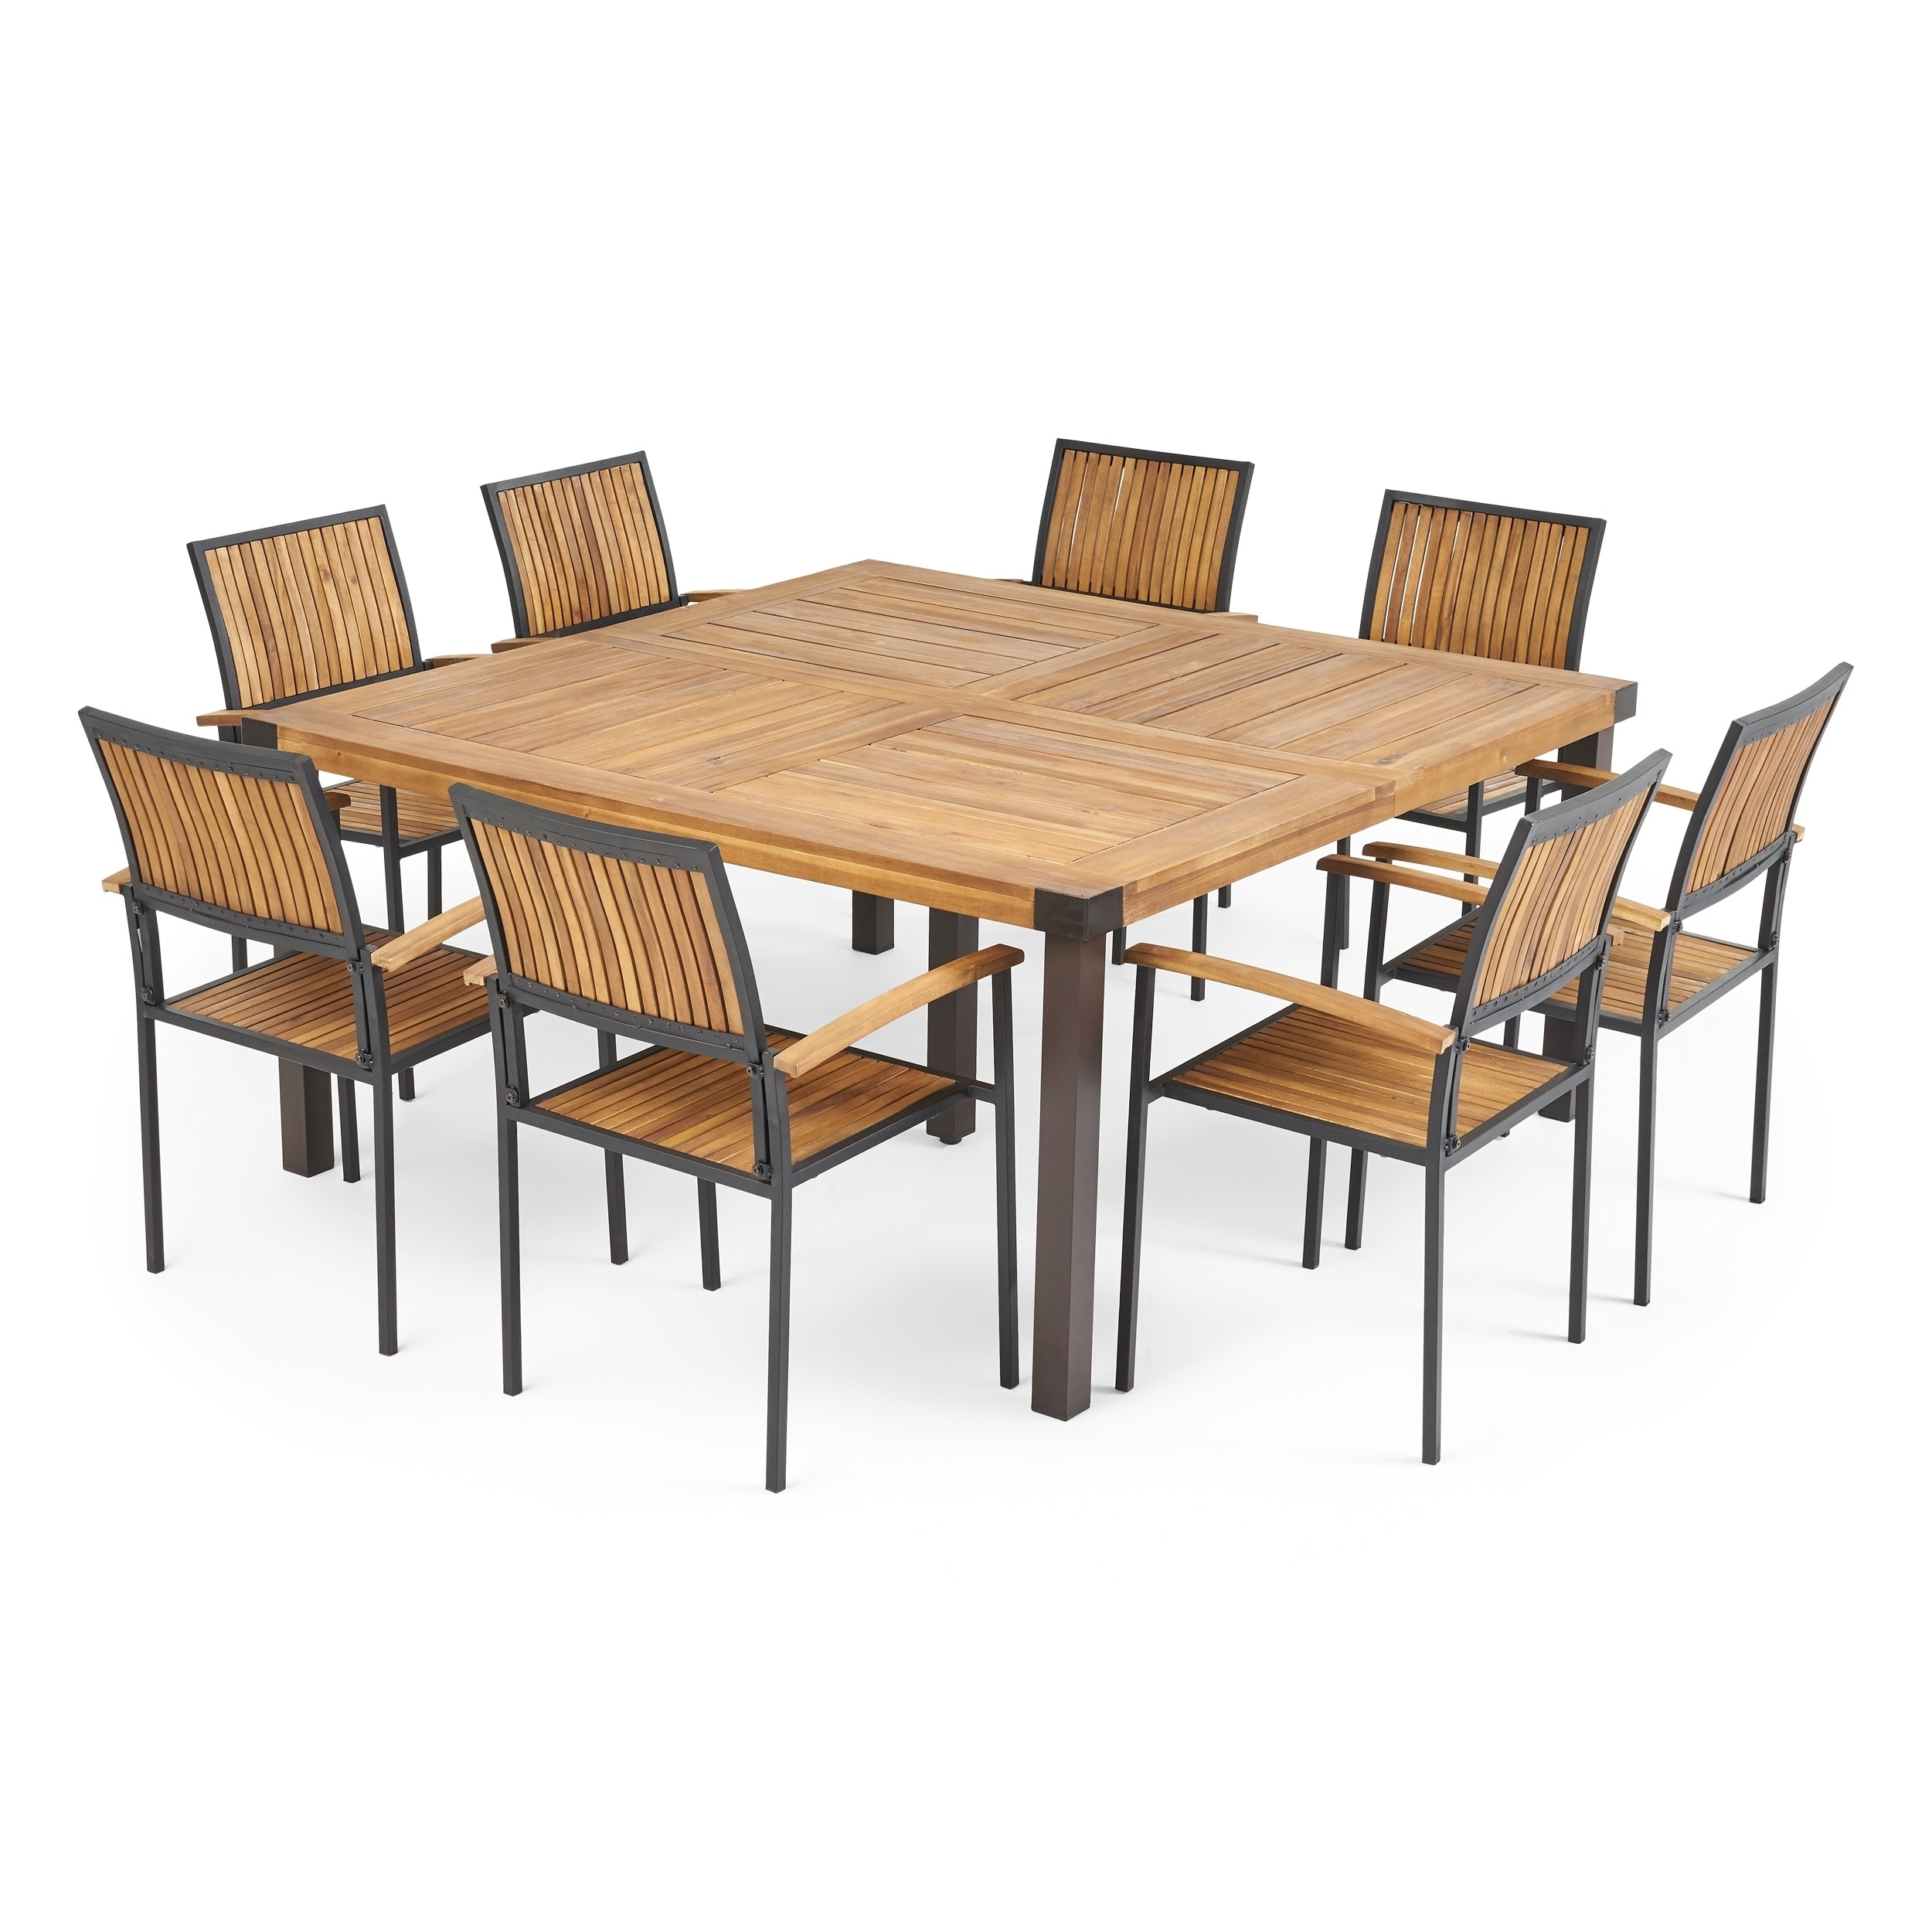 Lankershim Outdoor 8 Seater Acacia Wood Dining Set By Christopher Knight Home